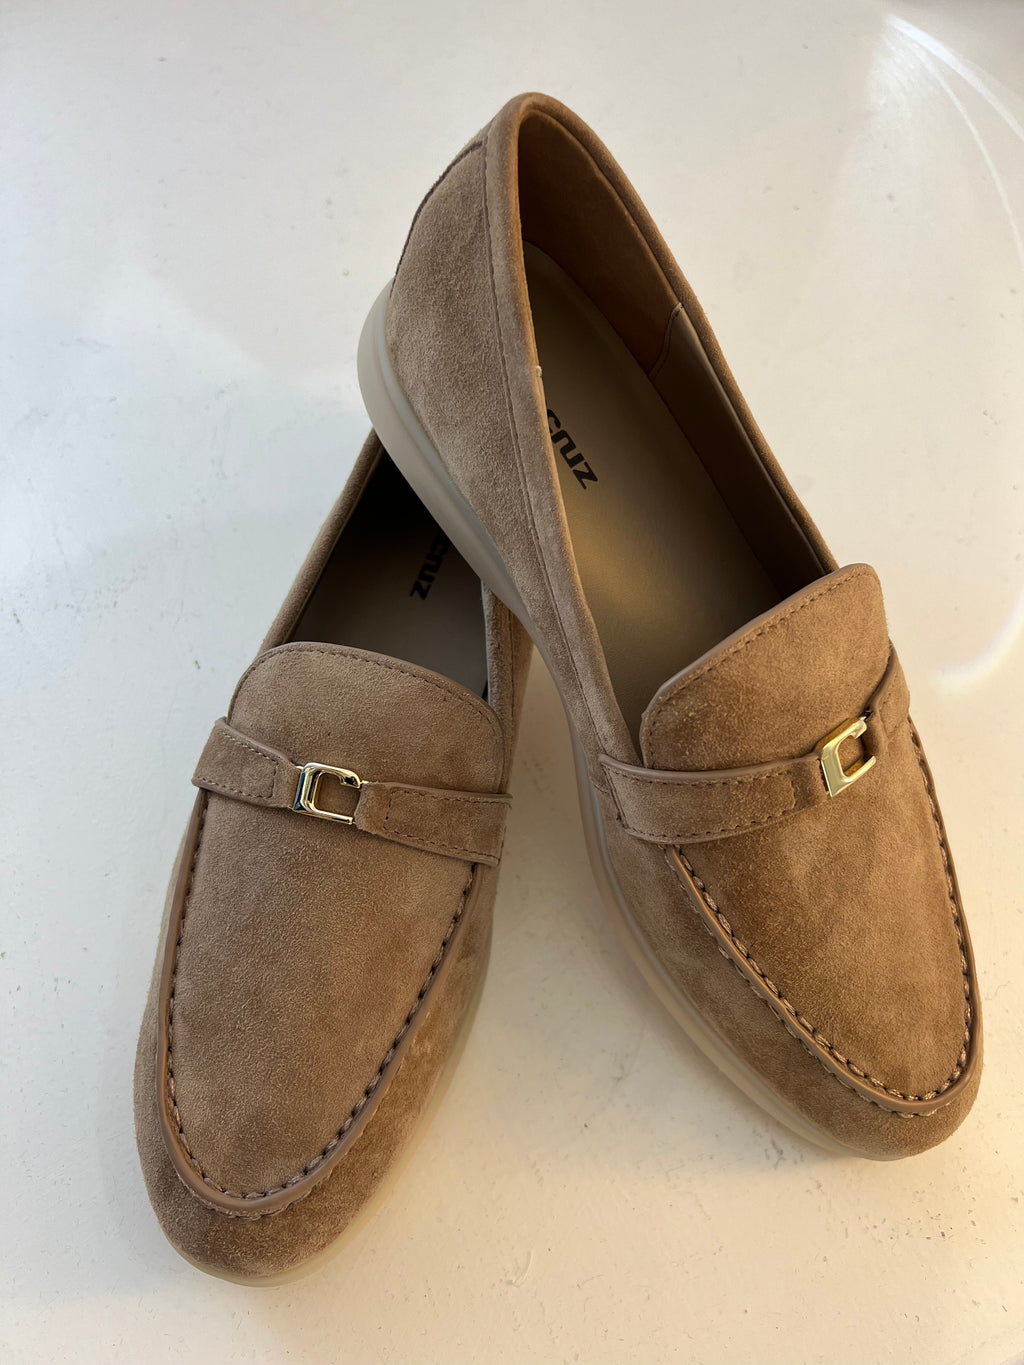 Hetre Alresford Hampshire Shoe Store Lola Cruz Taupe Suede Loafer